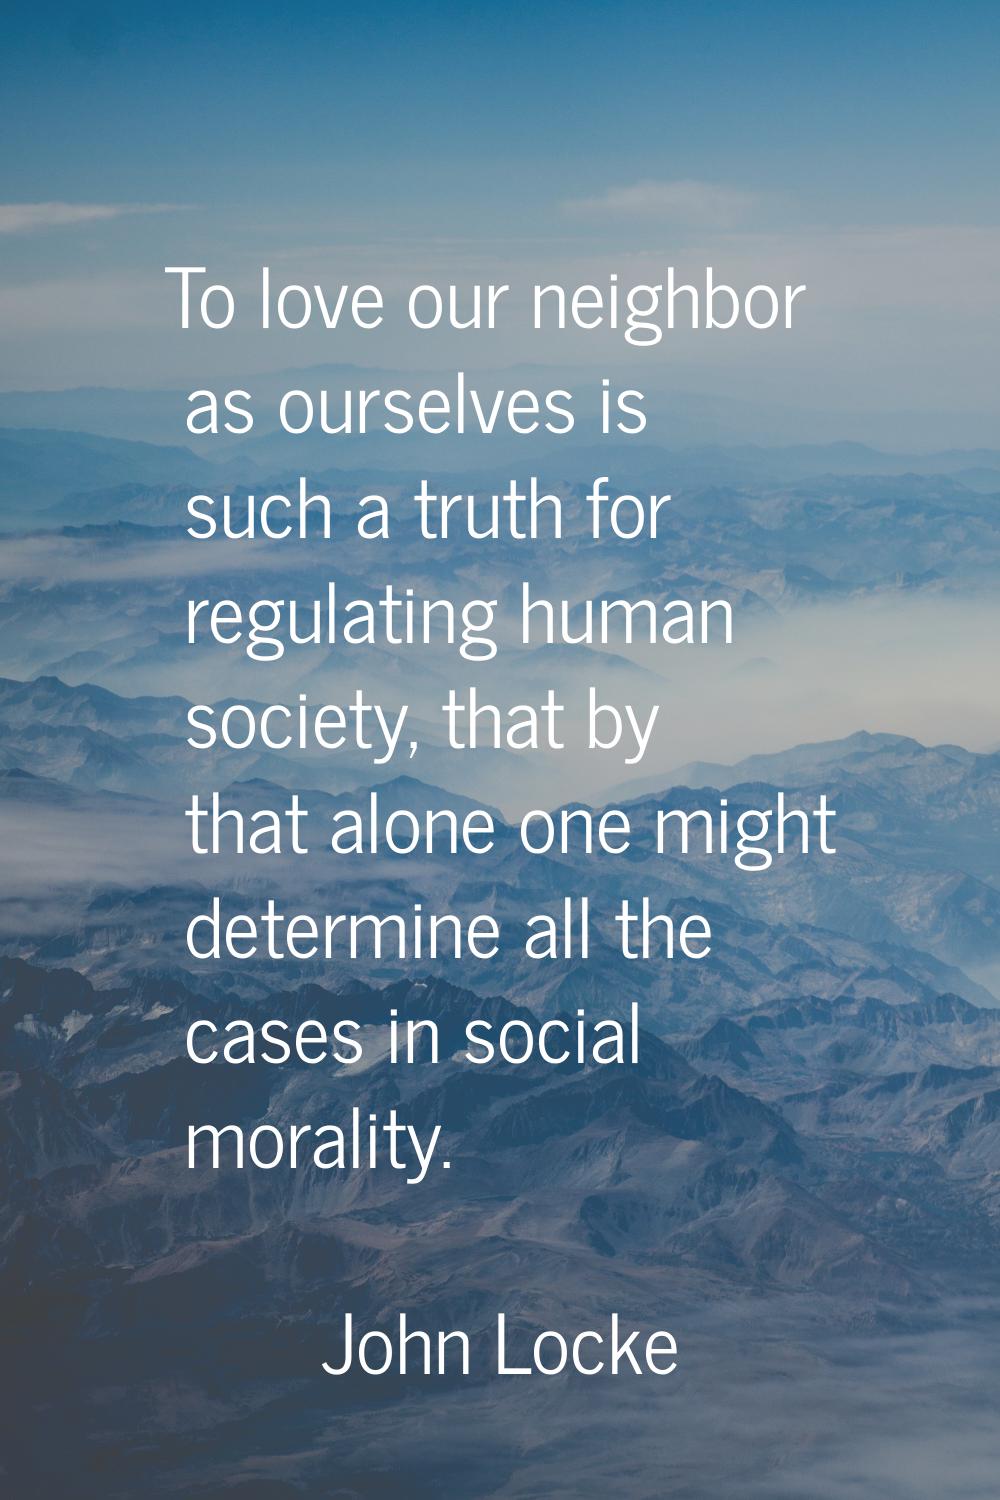 To love our neighbor as ourselves is such a truth for regulating human society, that by that alone 